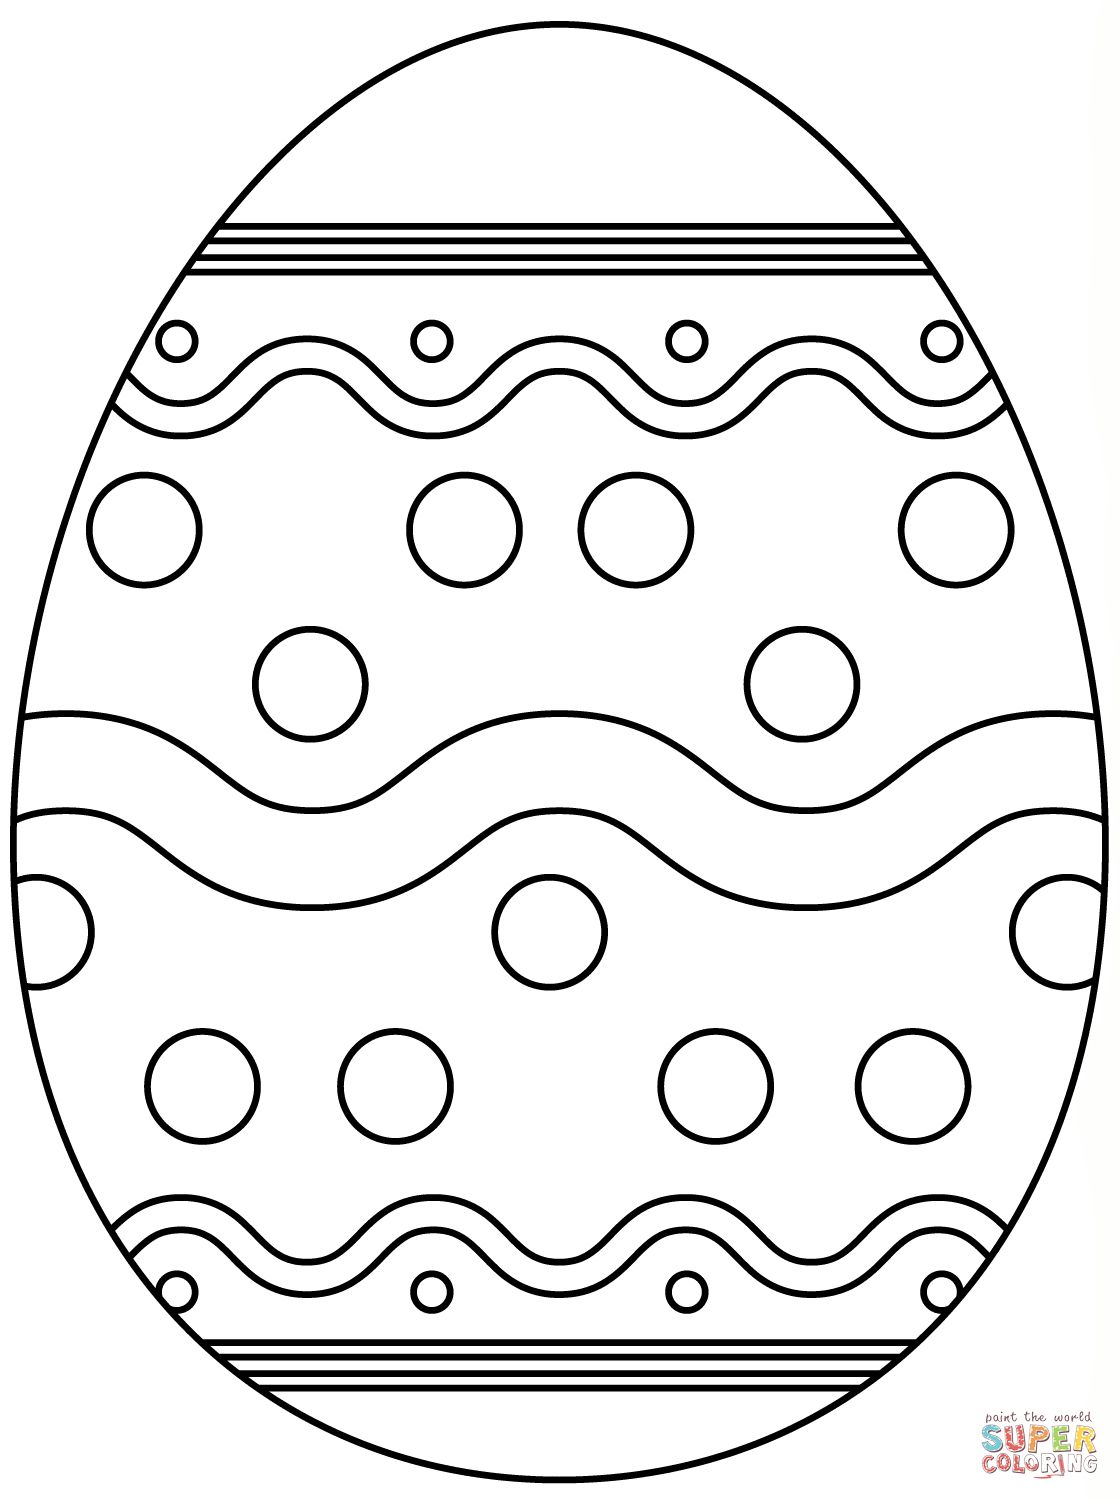 Easter Egg Colouring Pages - Part 9